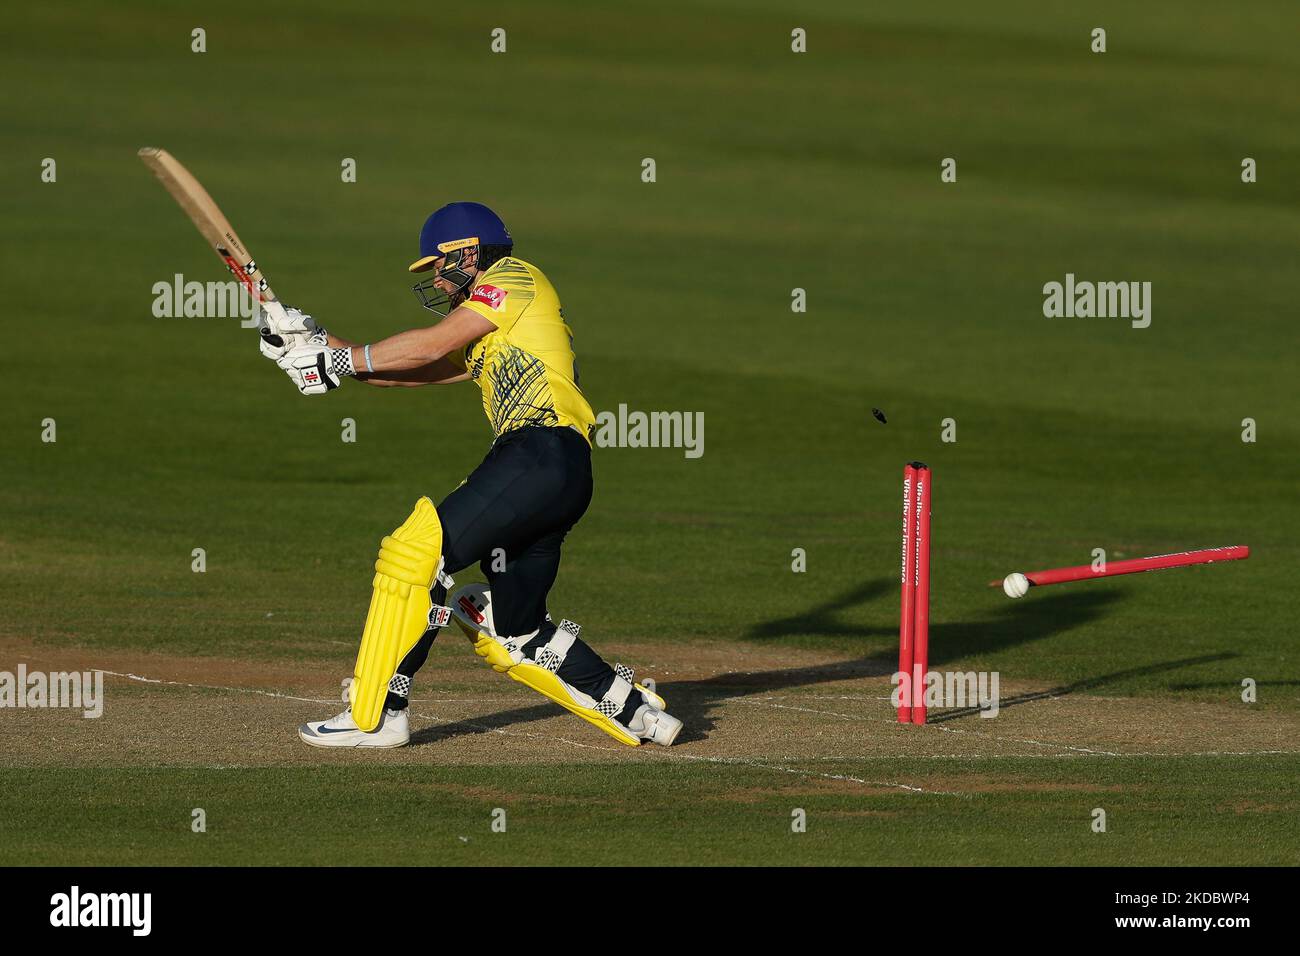 Ollie Robinson of Durham is bowled during the Vitality Blast T20 match between Durham County Cricket Club and Lancashire at the Seat Unique Riverside, Chester le Street on Friday 10th June 2022. (Photo by Will Matthews/MI News/NurPhoto) Stock Photo